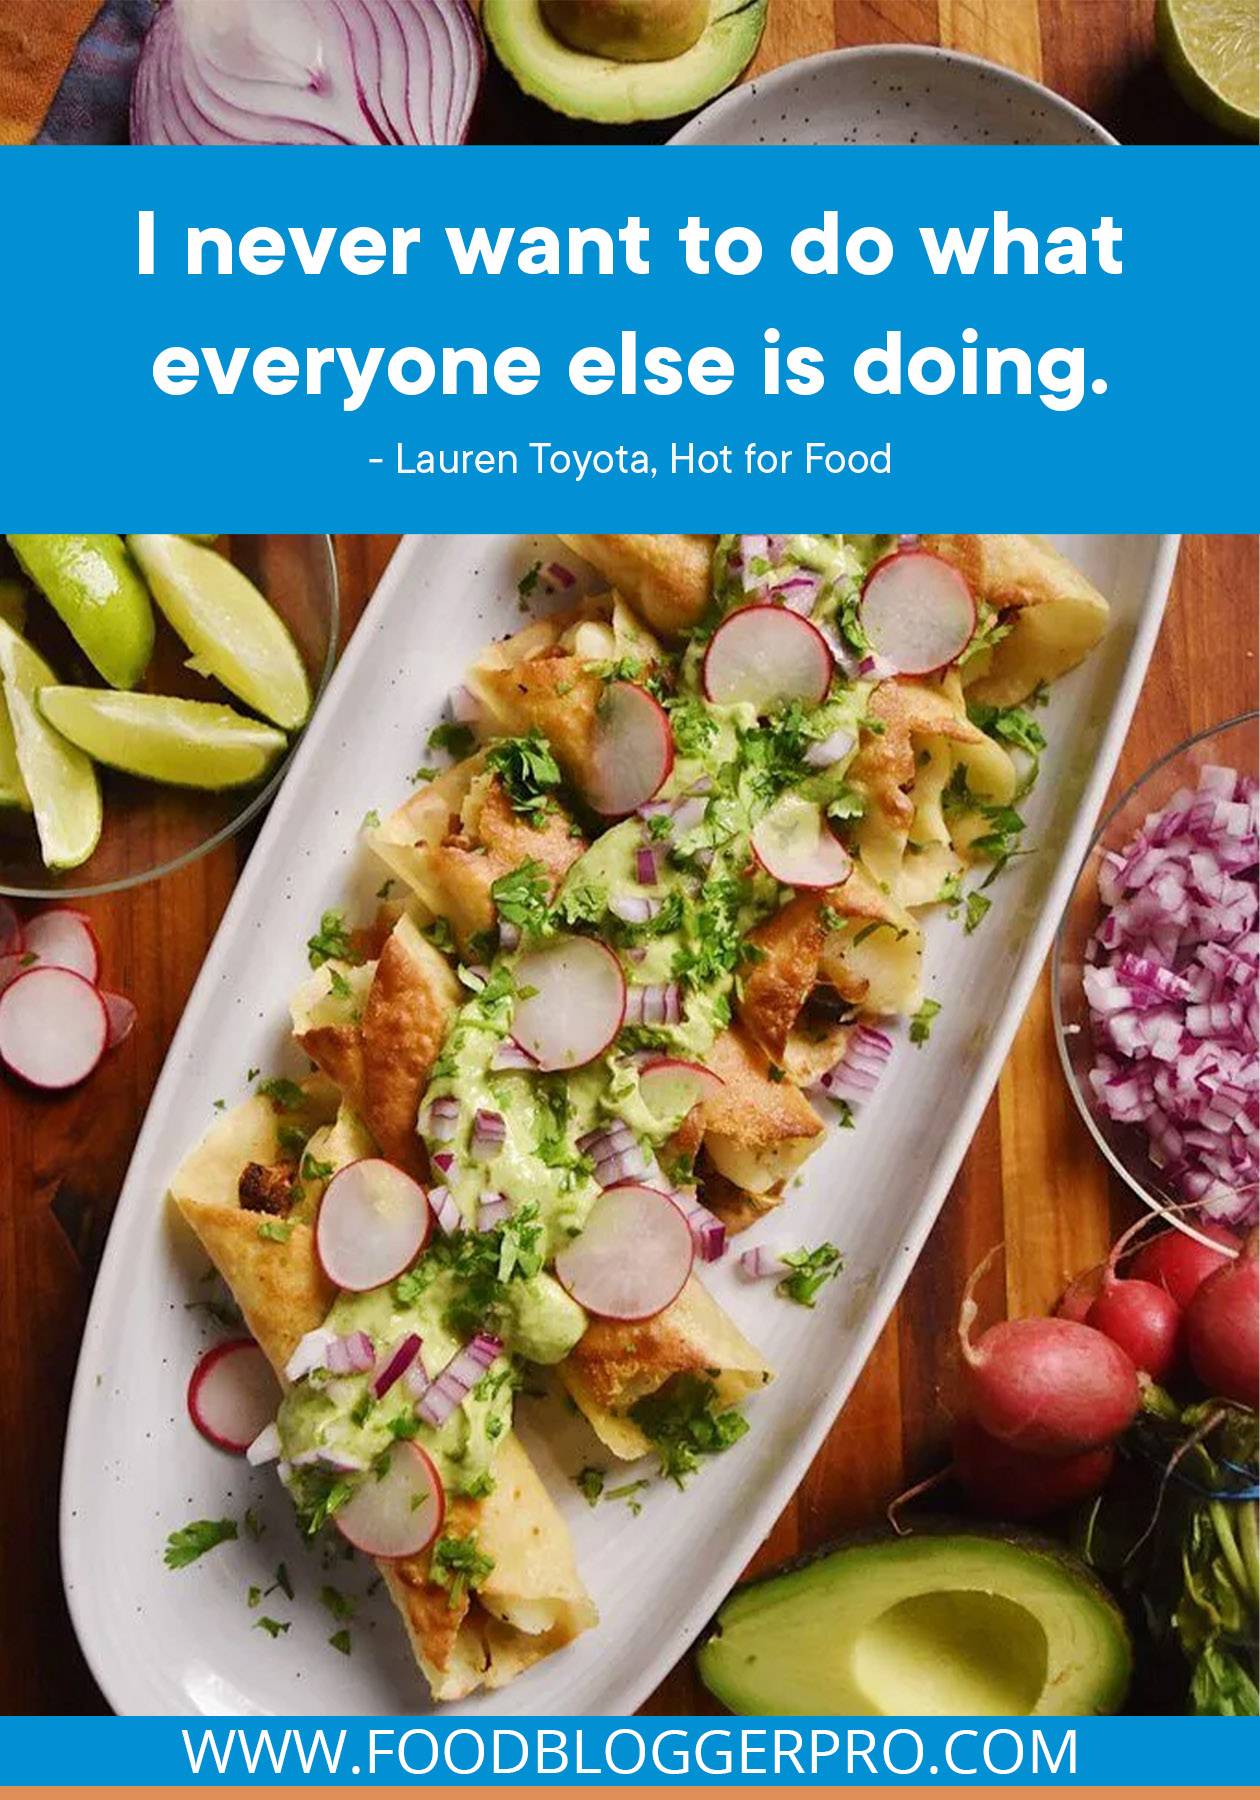 A photograph of a plate of flautas with a quote from Lauren Toyota's episode of The Food Blogger Pro Podcast that reads "I never want to do what everyone else is doing."